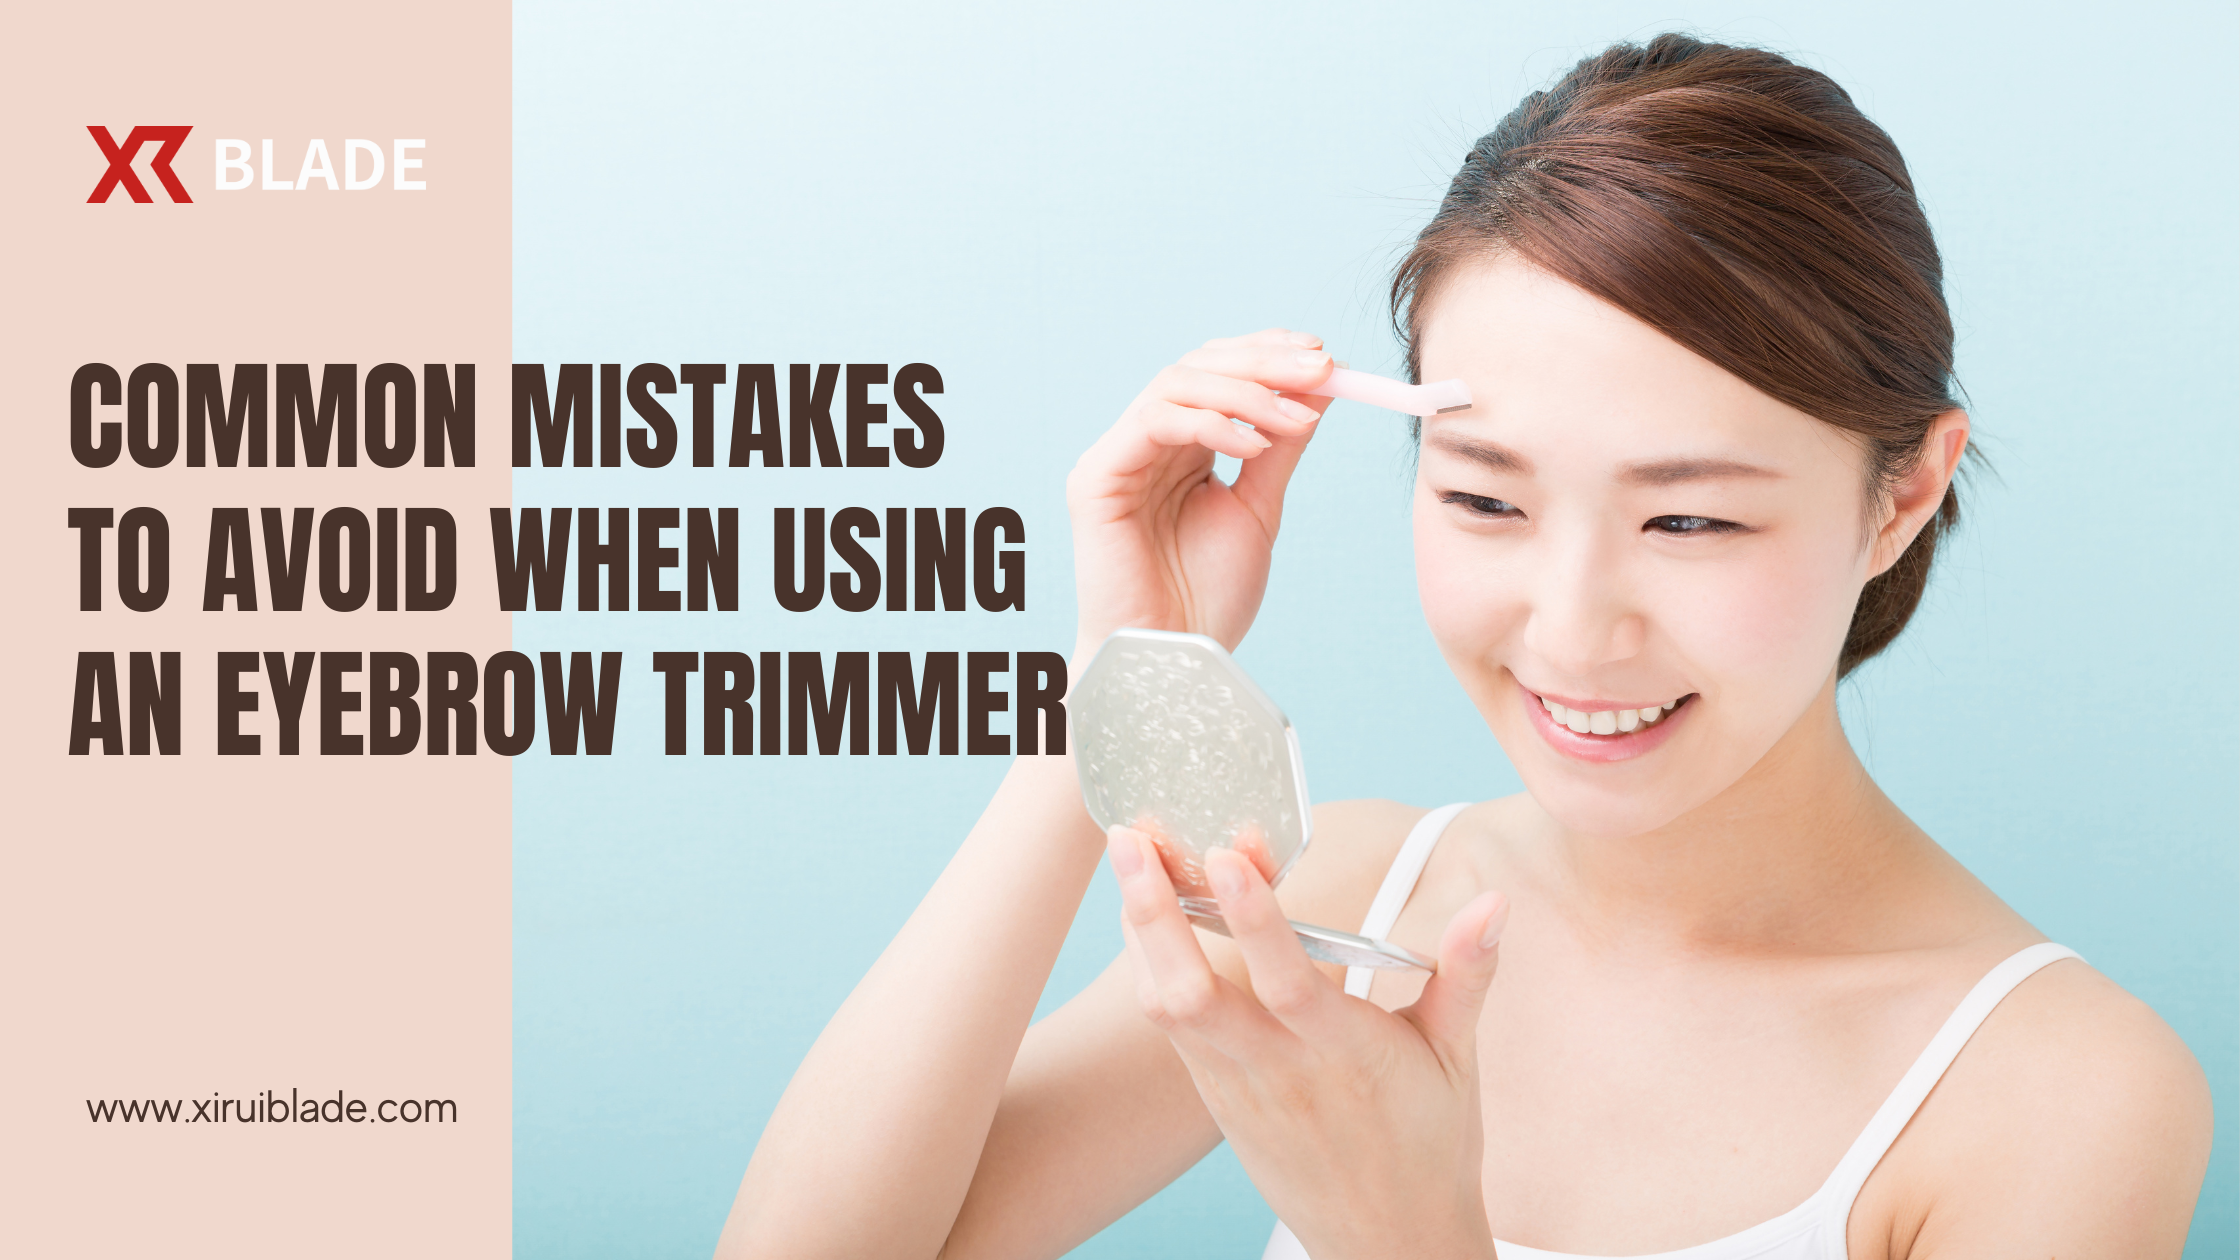 Common Mistakes to Avoid When Using an Eyebrow Trimmer